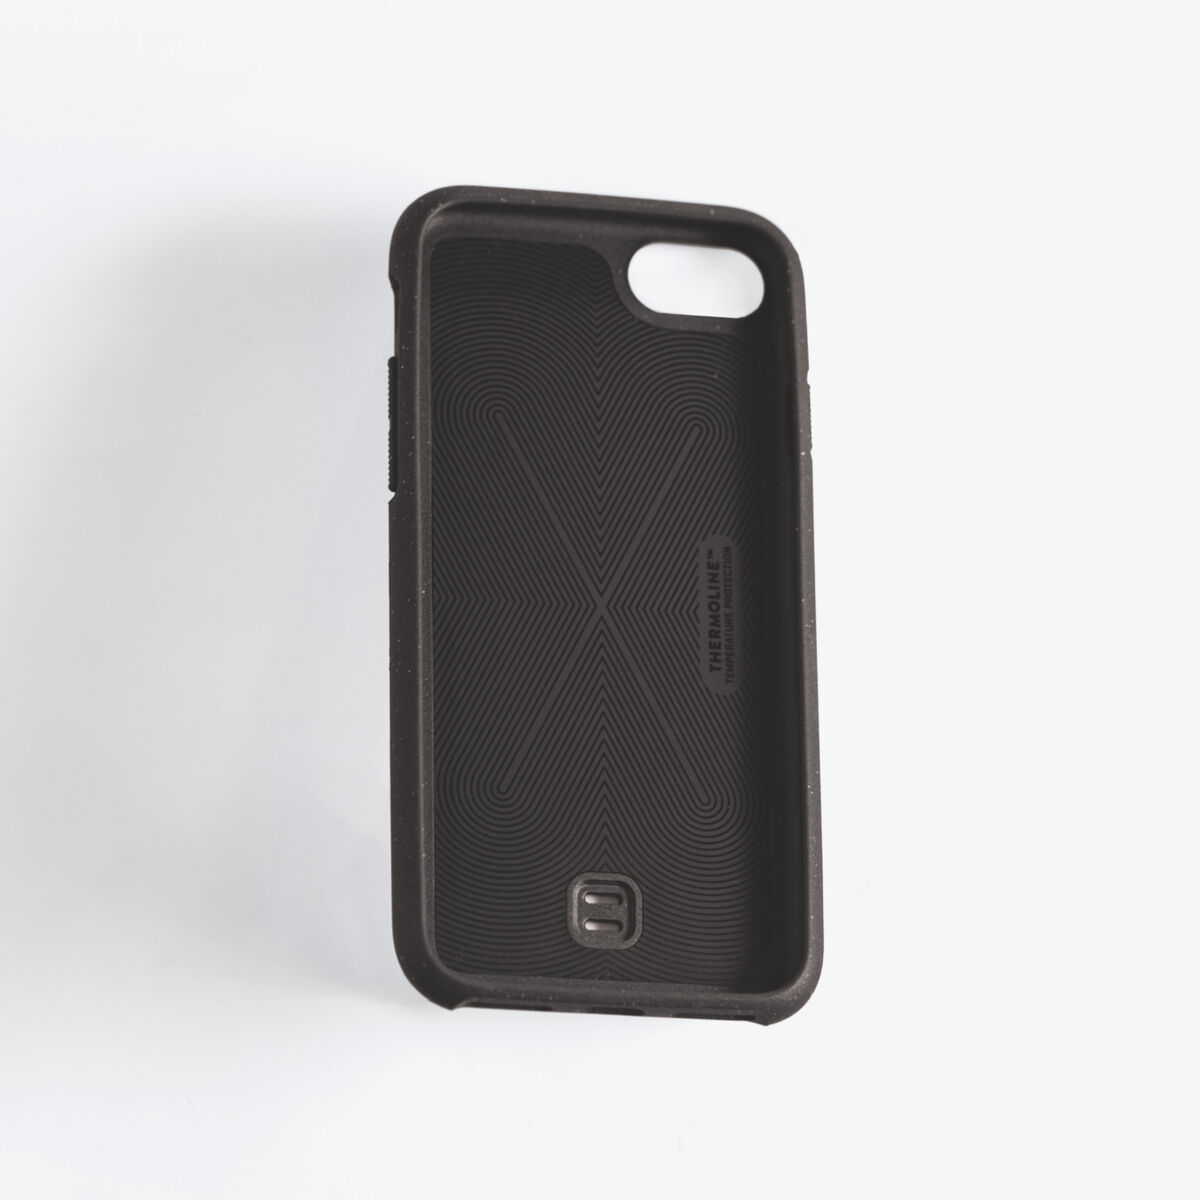 Torrey® Case for Apple iPhone Xs